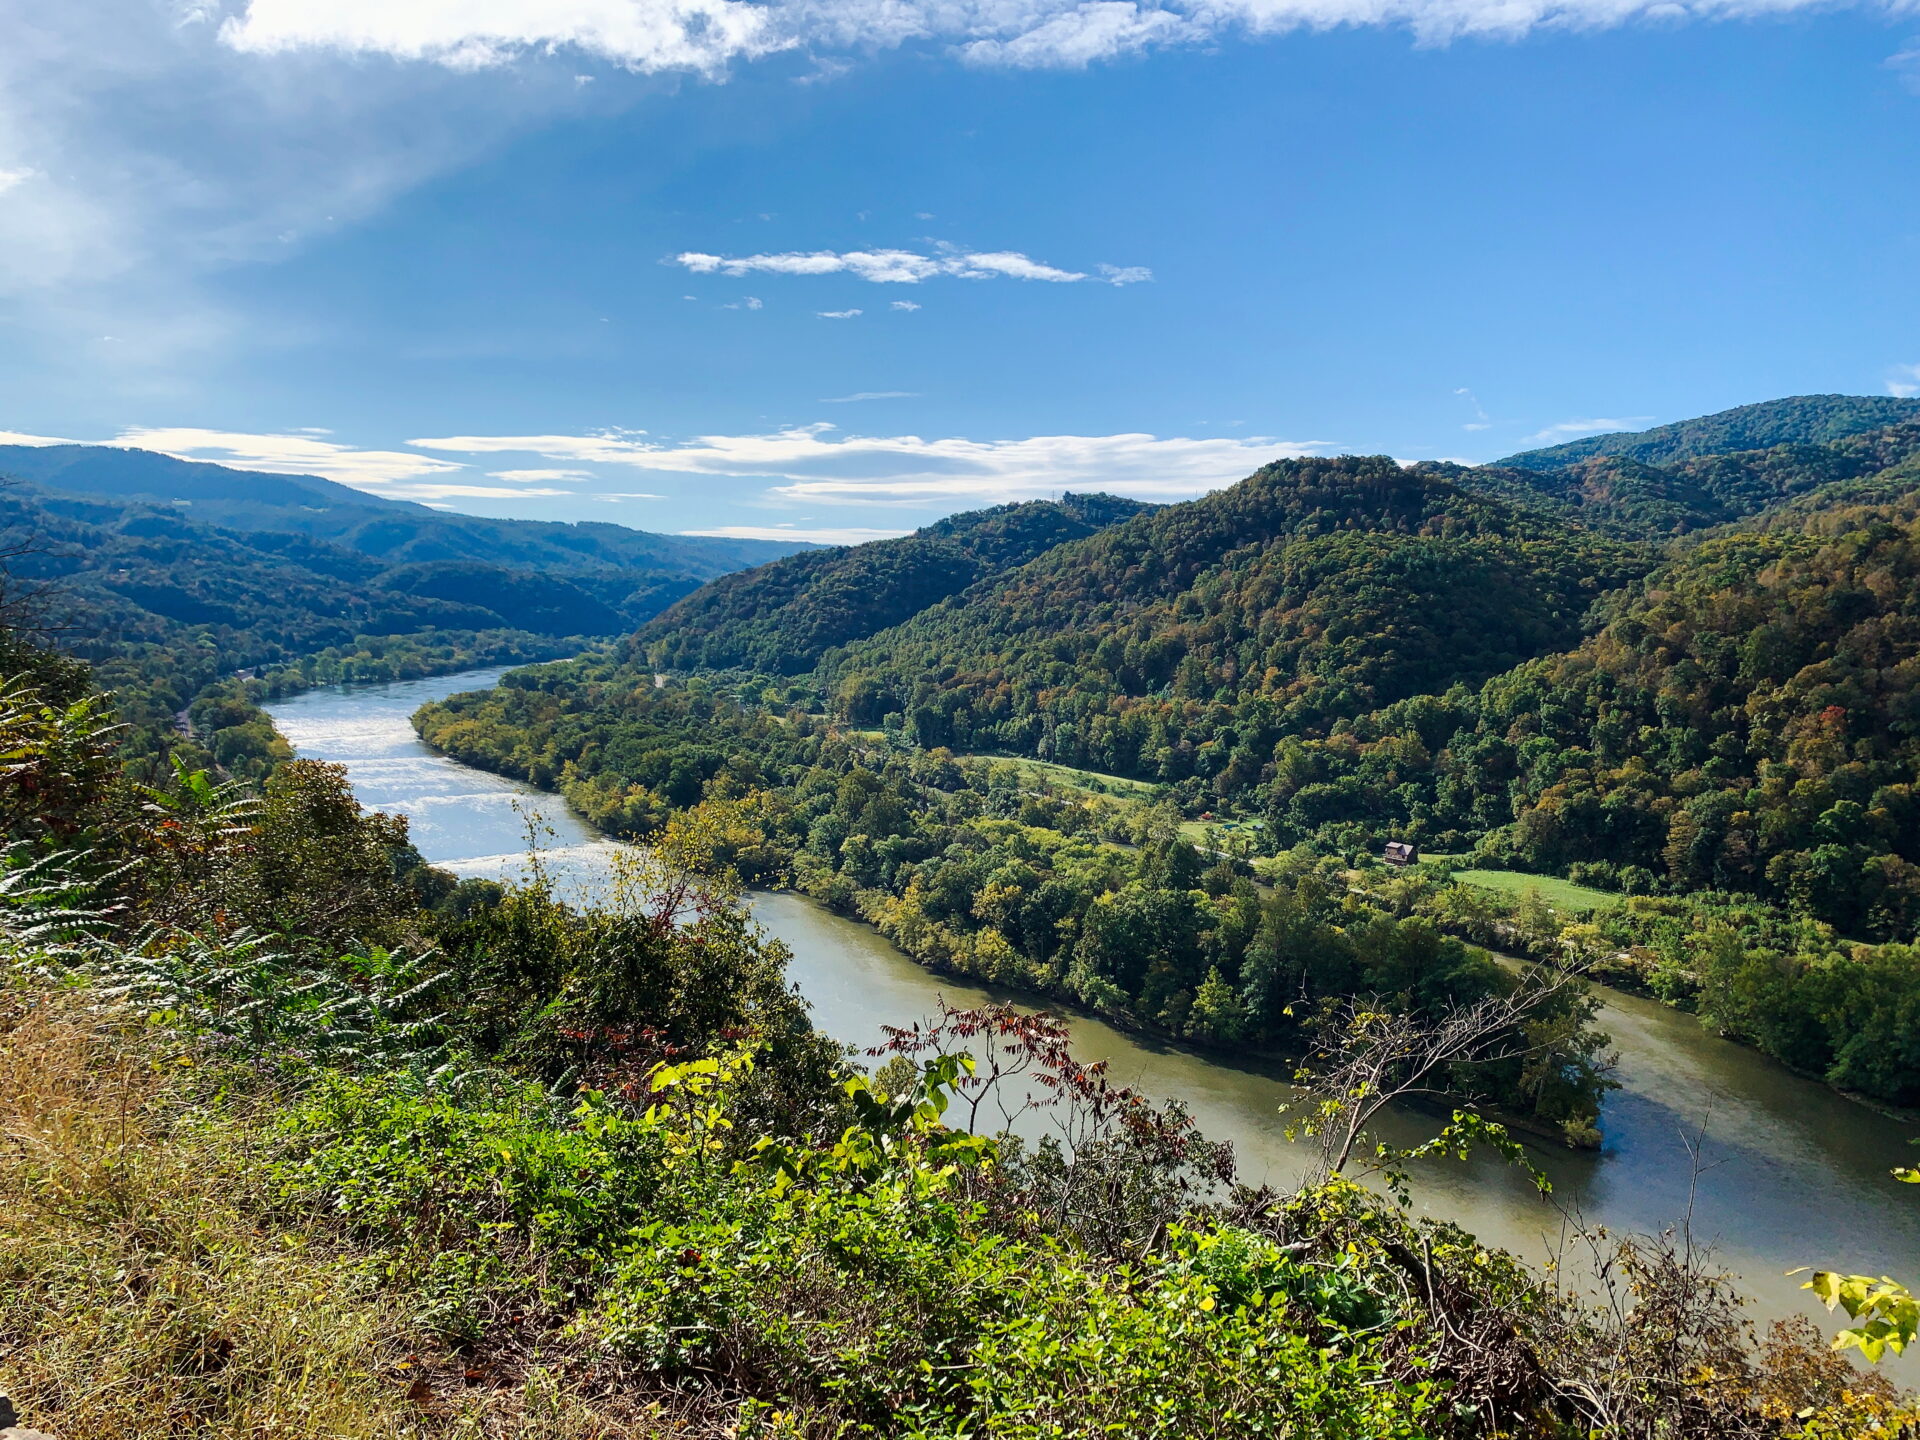 View of Sandstone Falls area of New River Gorge National Park